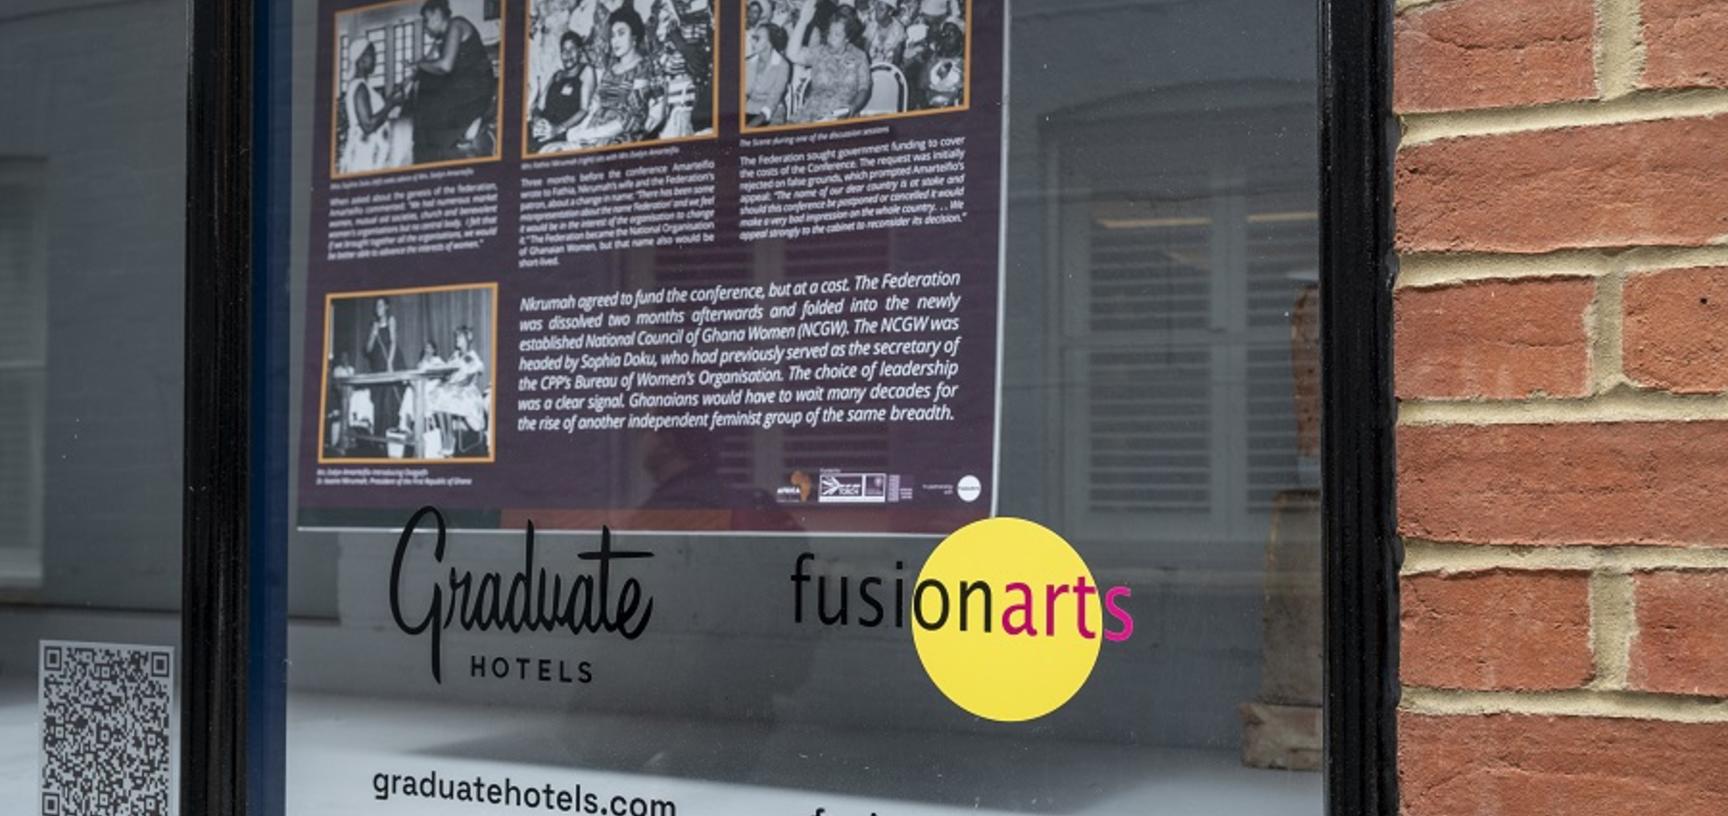 Window display featuring posters